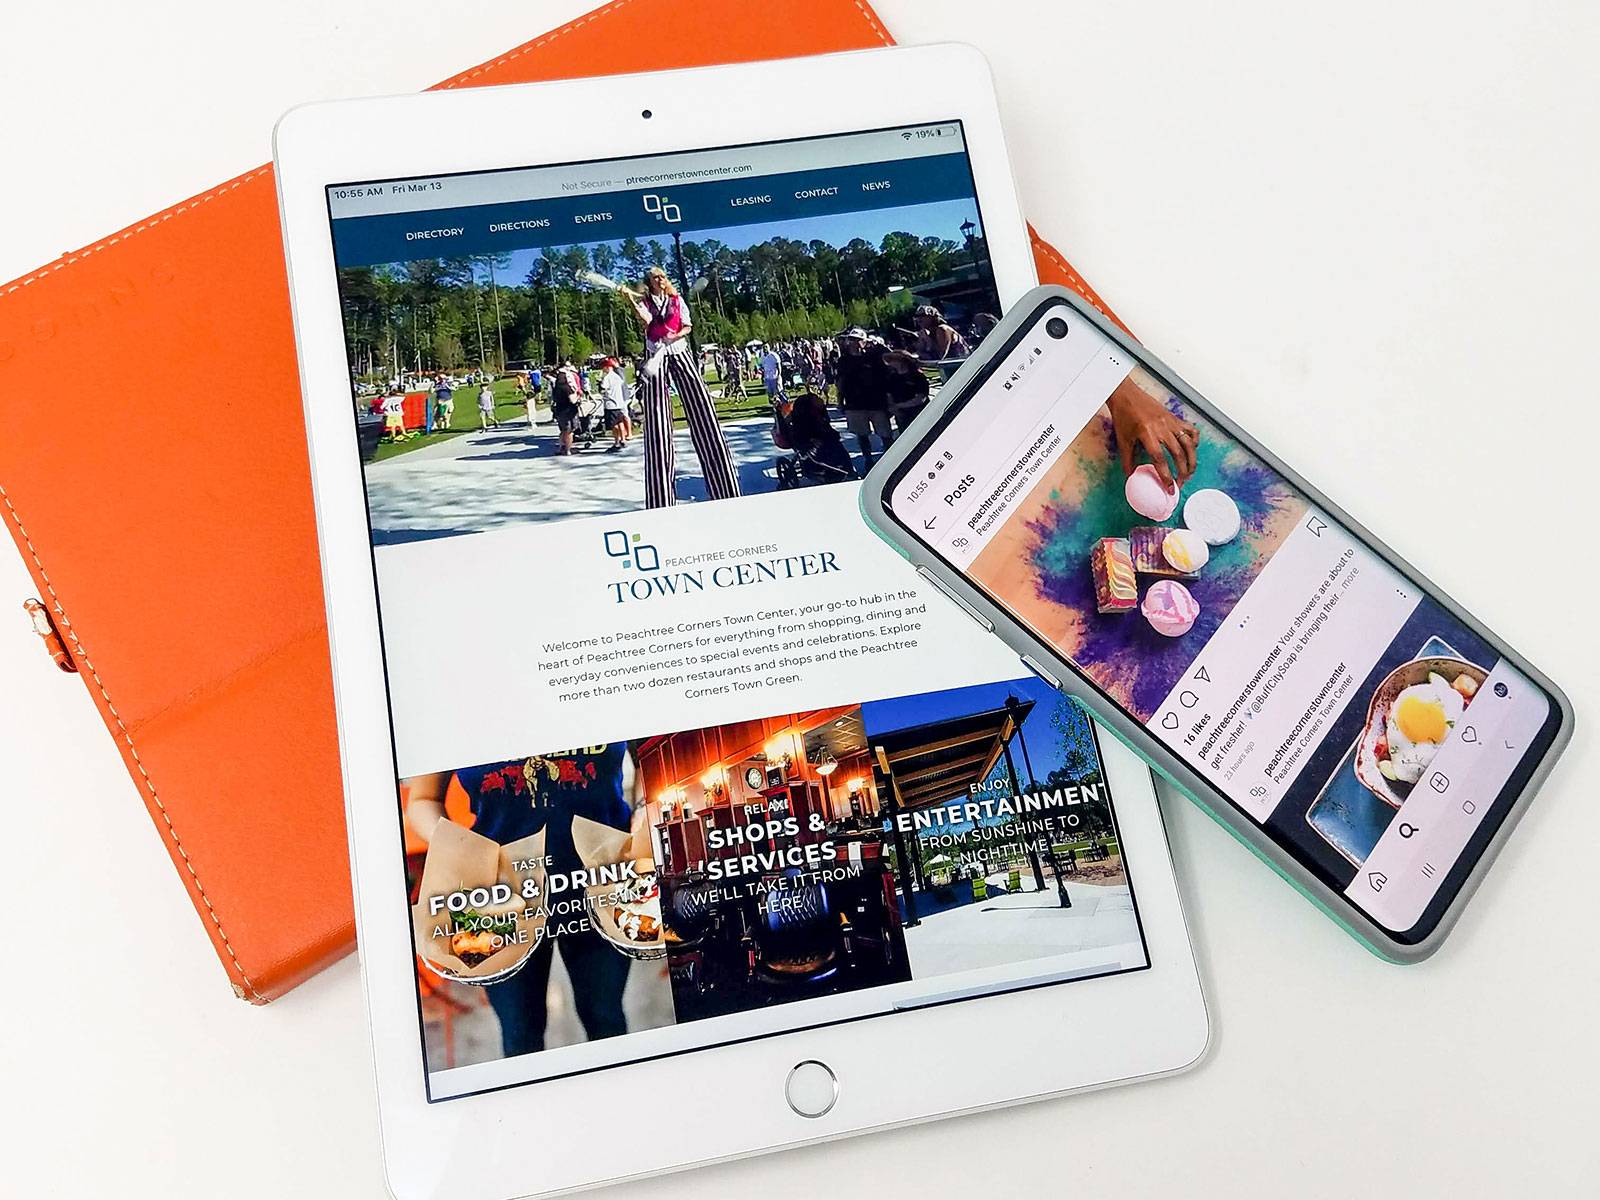 Peachtree Corners Town Center | Website Design and Social Media by Clementine Creative Agency | Atlanta, GA